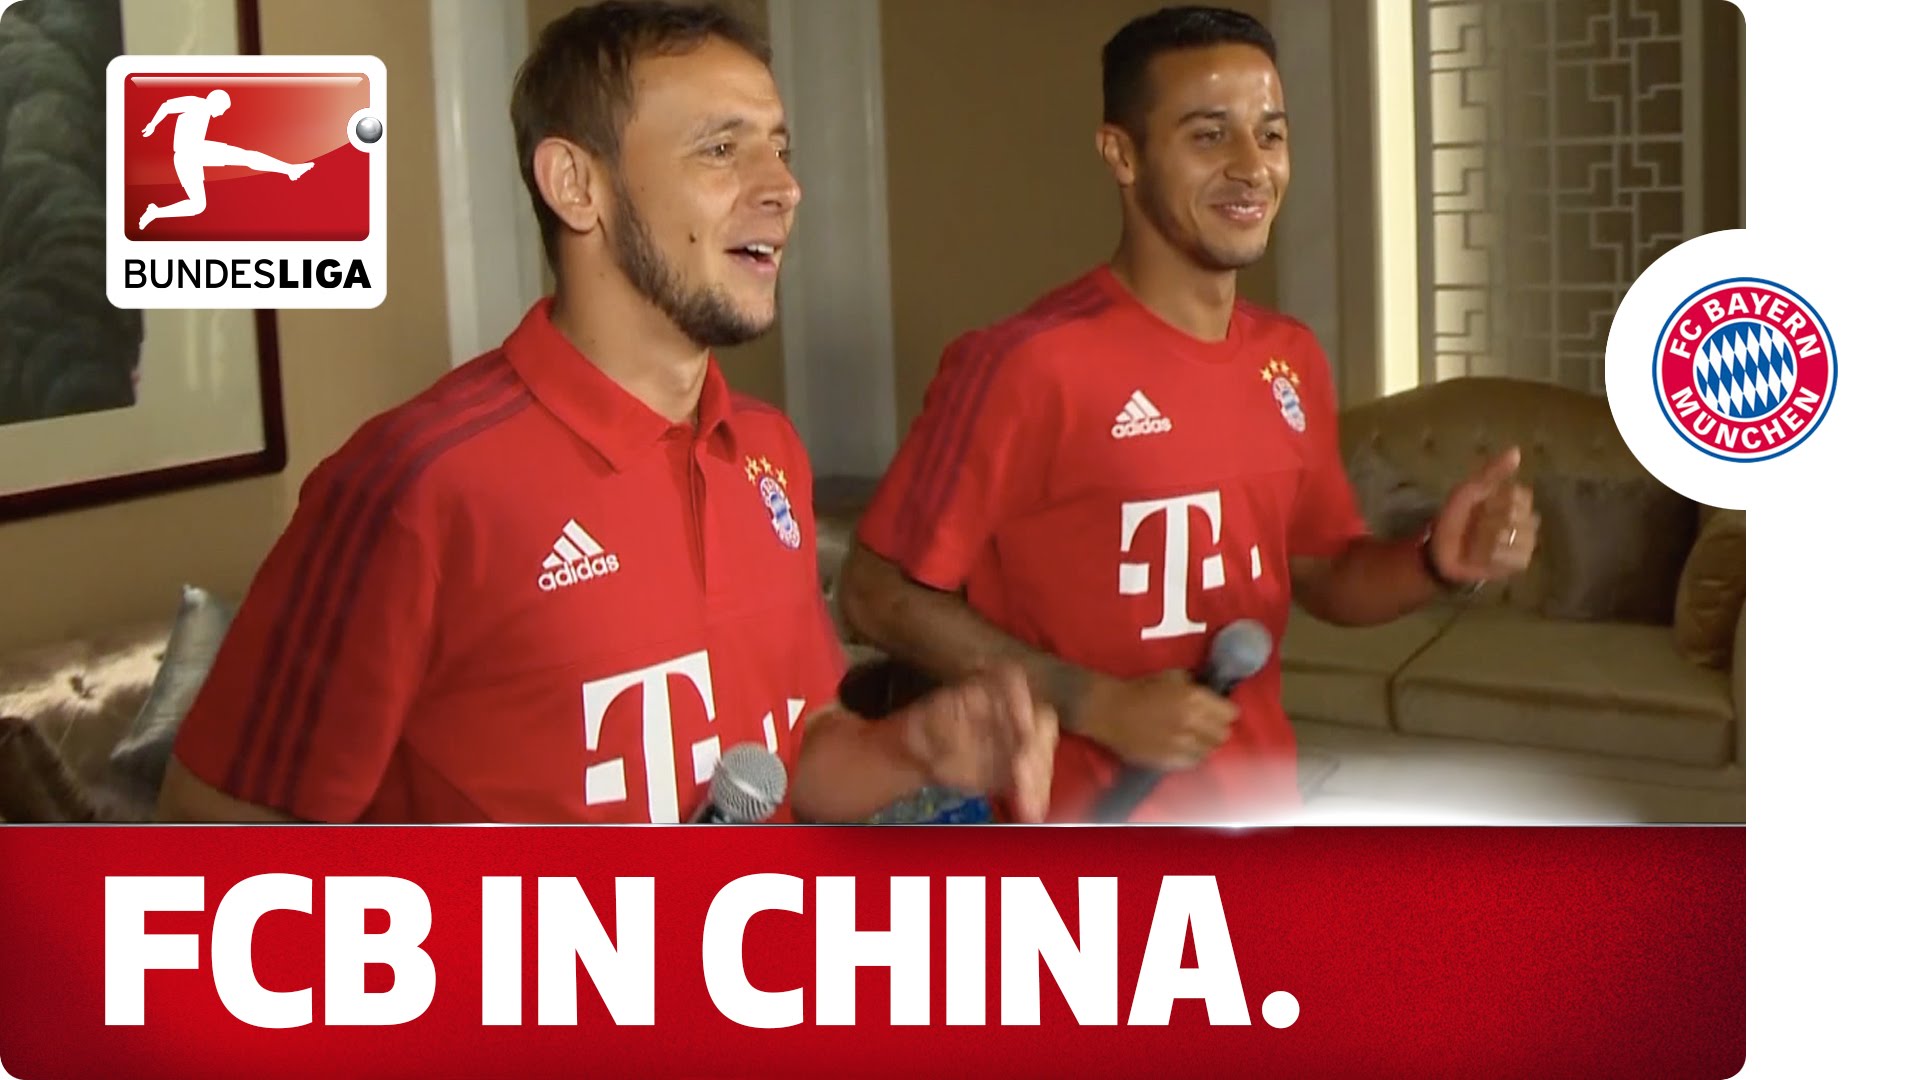 Bayern München - Home From Home in China - YouTube